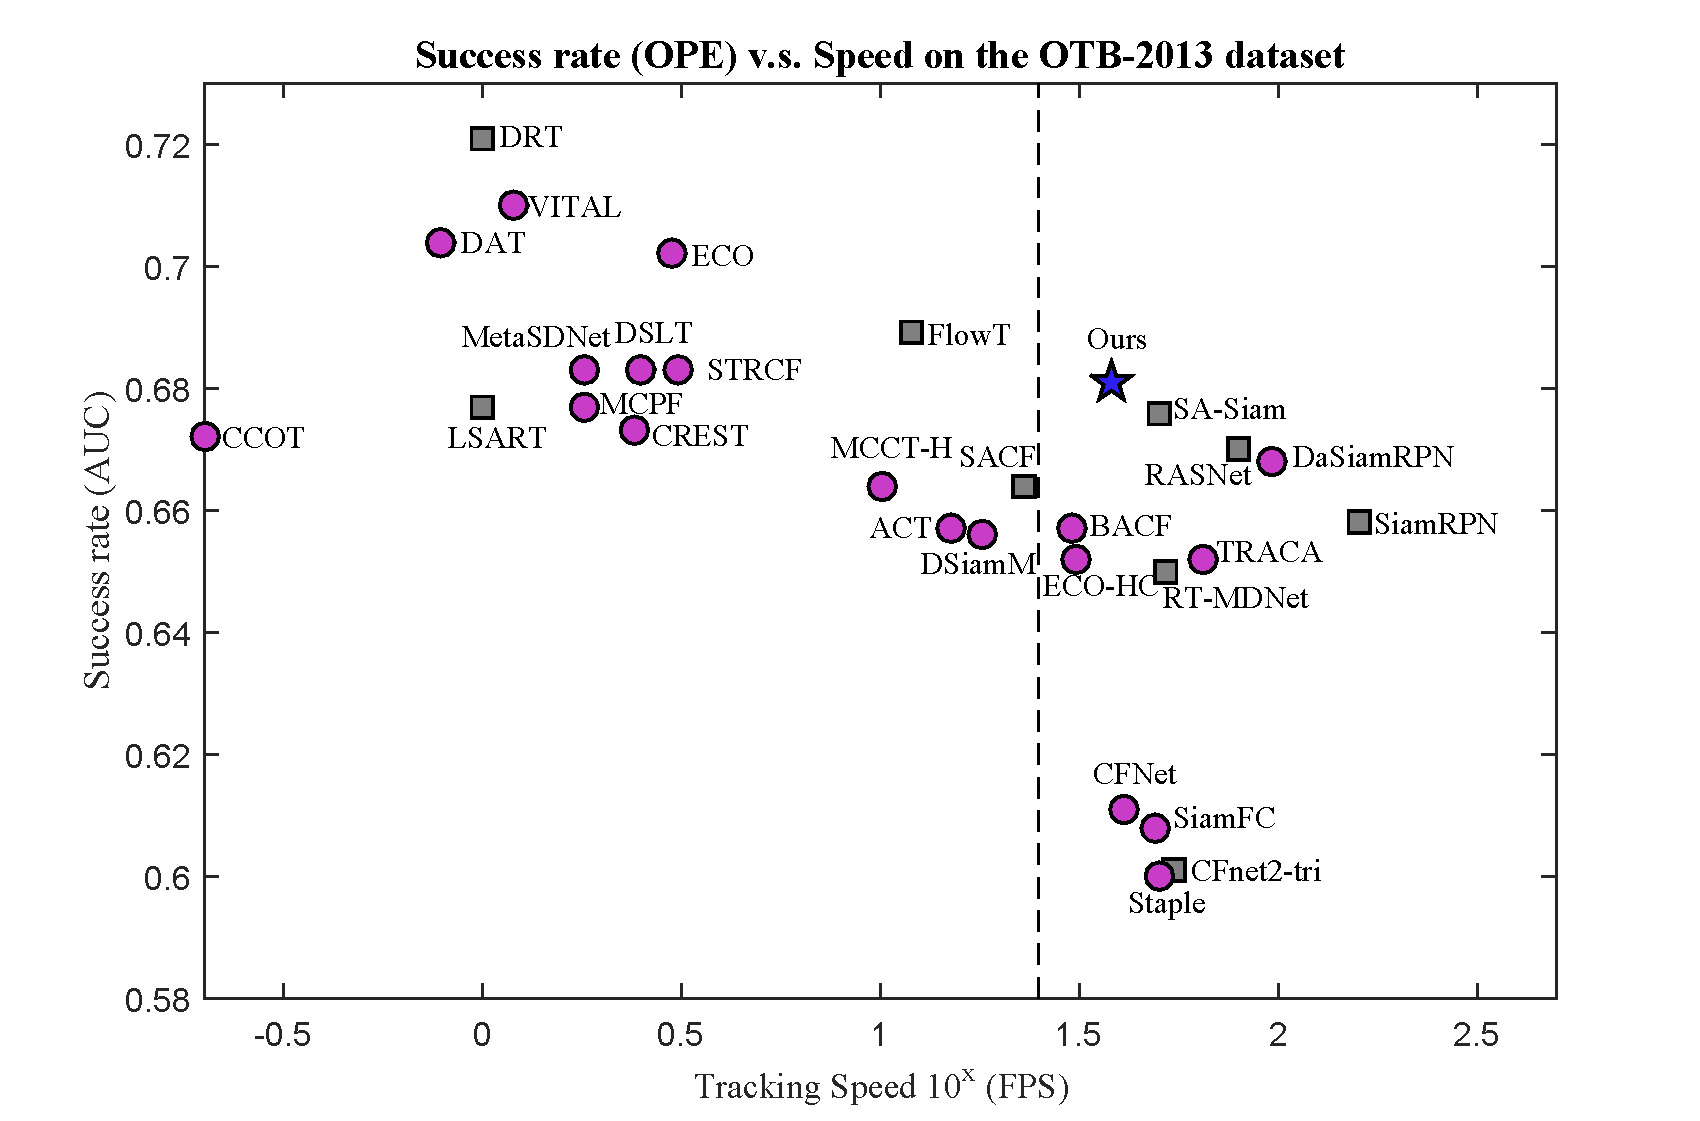 Tracking accuracy vs. speed on the OTB-2013 dataset.